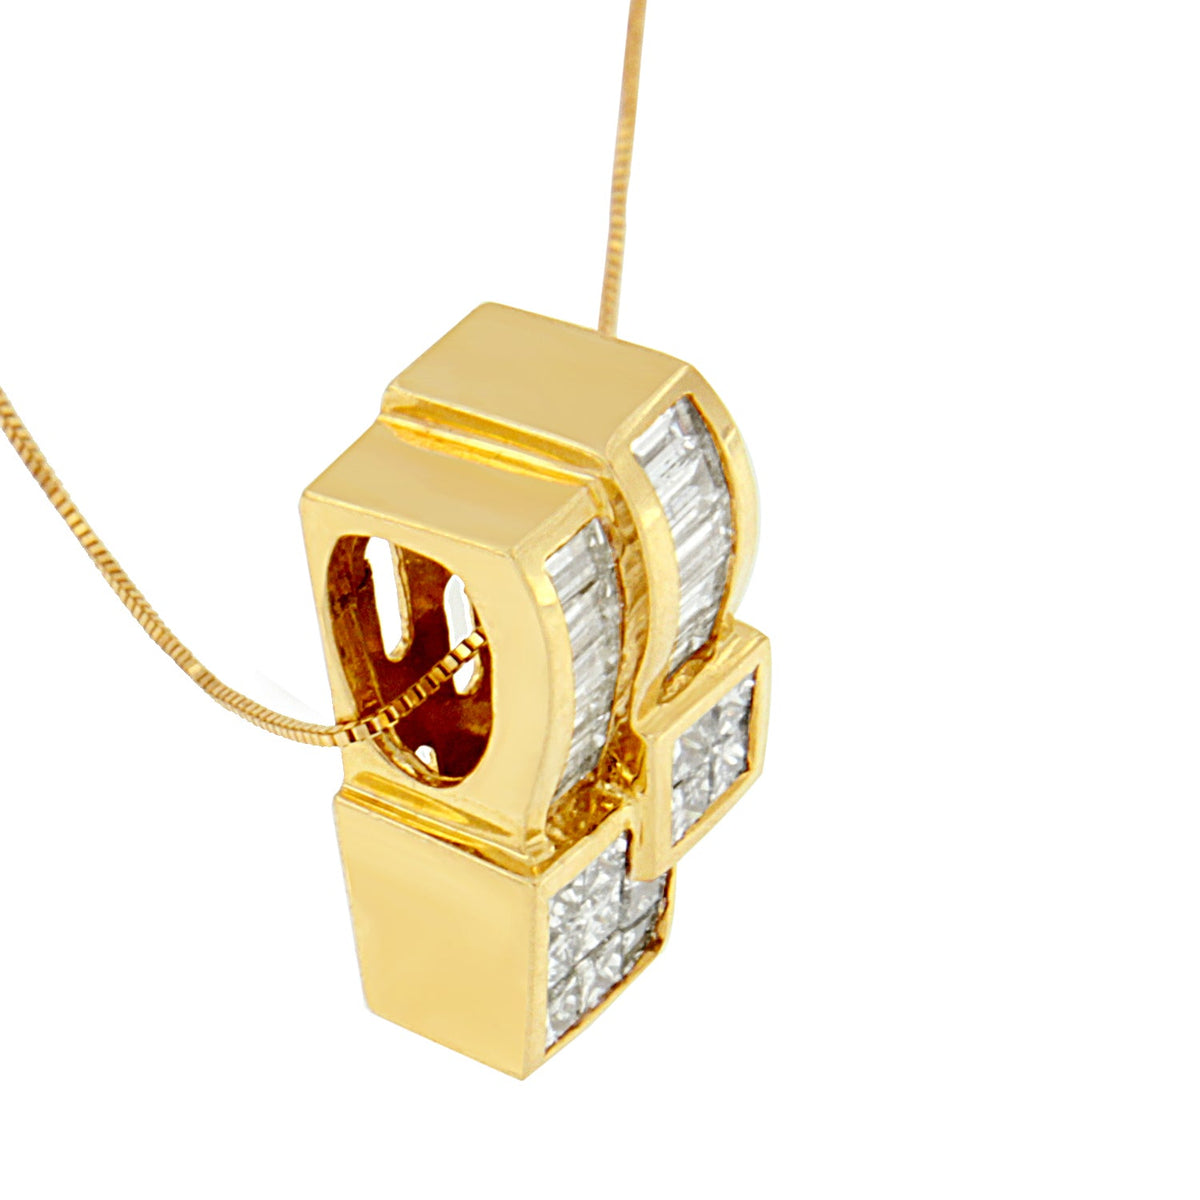 14K Yellow Gold 1 1/2 cttw Princess and Baguette Cut Diamond Geometric Pendant Necklace (H-I Color, VS1-VS2 Clarity) - LinkagejewelrydesignLinkagejewelrydesign